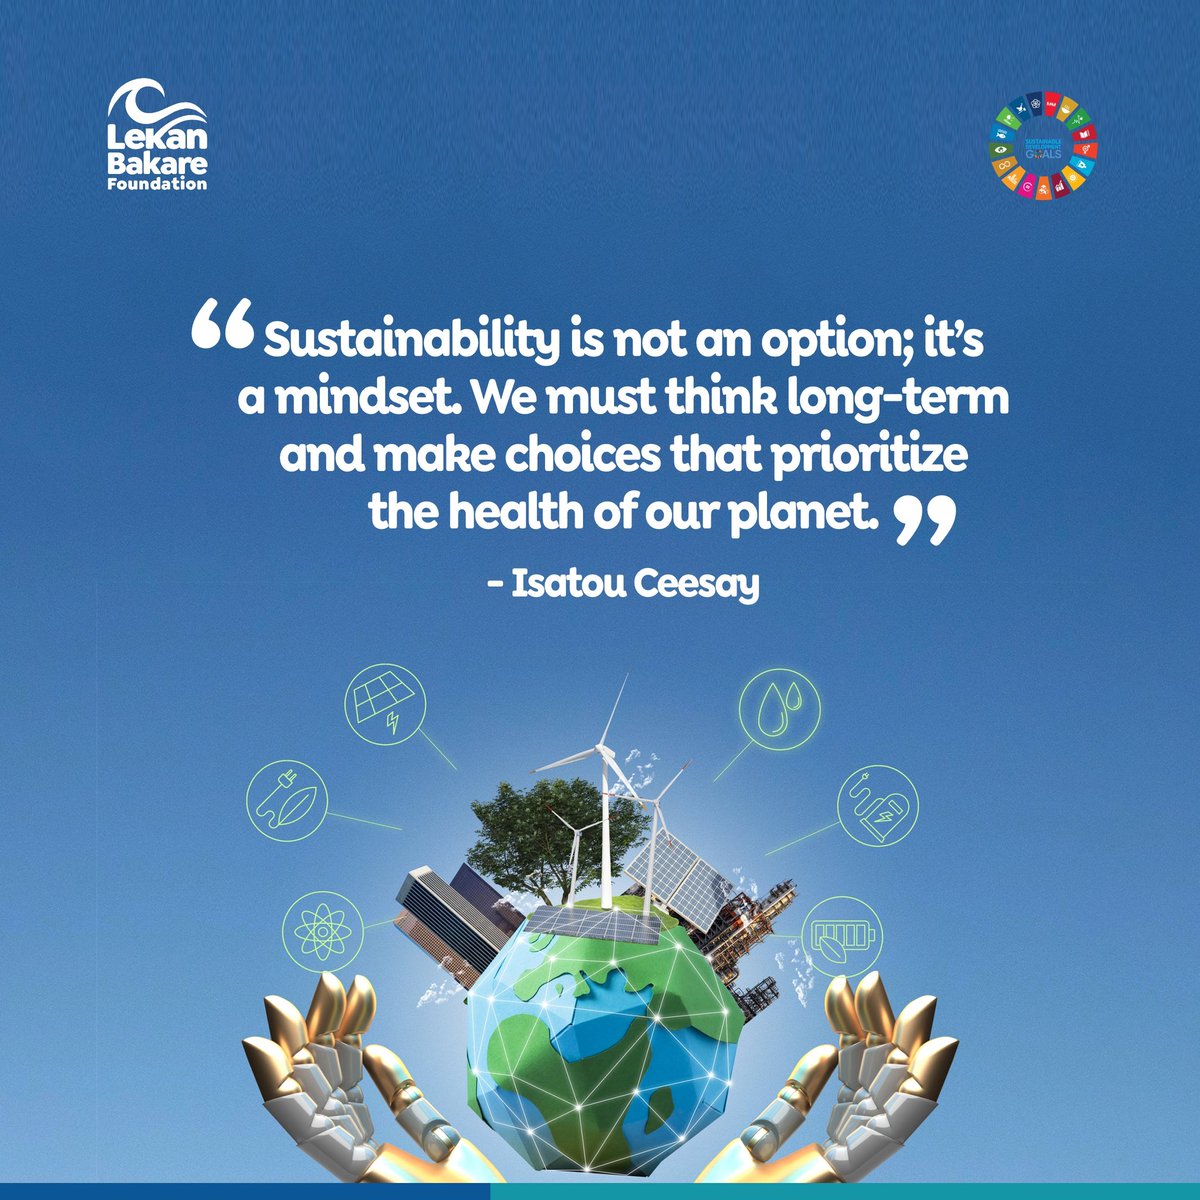 Sustainability is not an option but a mindset. This week, think long-term, prioritise posterity and protect our planet.

Have a great week!

#MondayMotivation
#ProtectTheEnvironment
#ProtectOurOceans
#LekanBakareFoundation